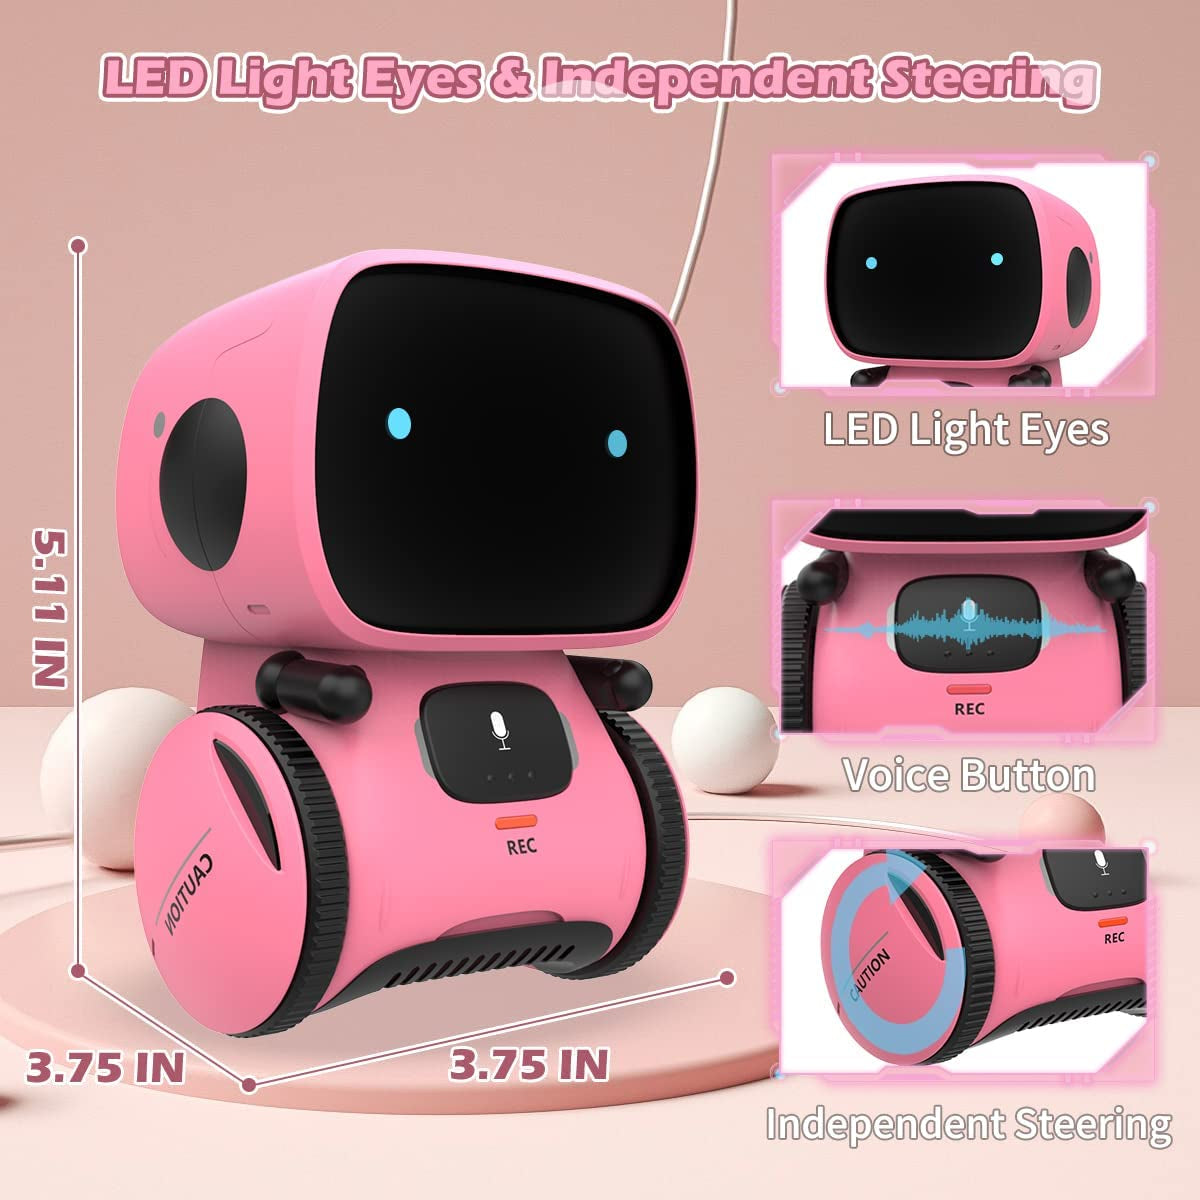 Robots for Girls 3-5, Interactive Smart Robotic with Touch Sensor, Voice Control, Speech Recognition, Singing, Dancing, Repeating and Recording, Gift for Kids